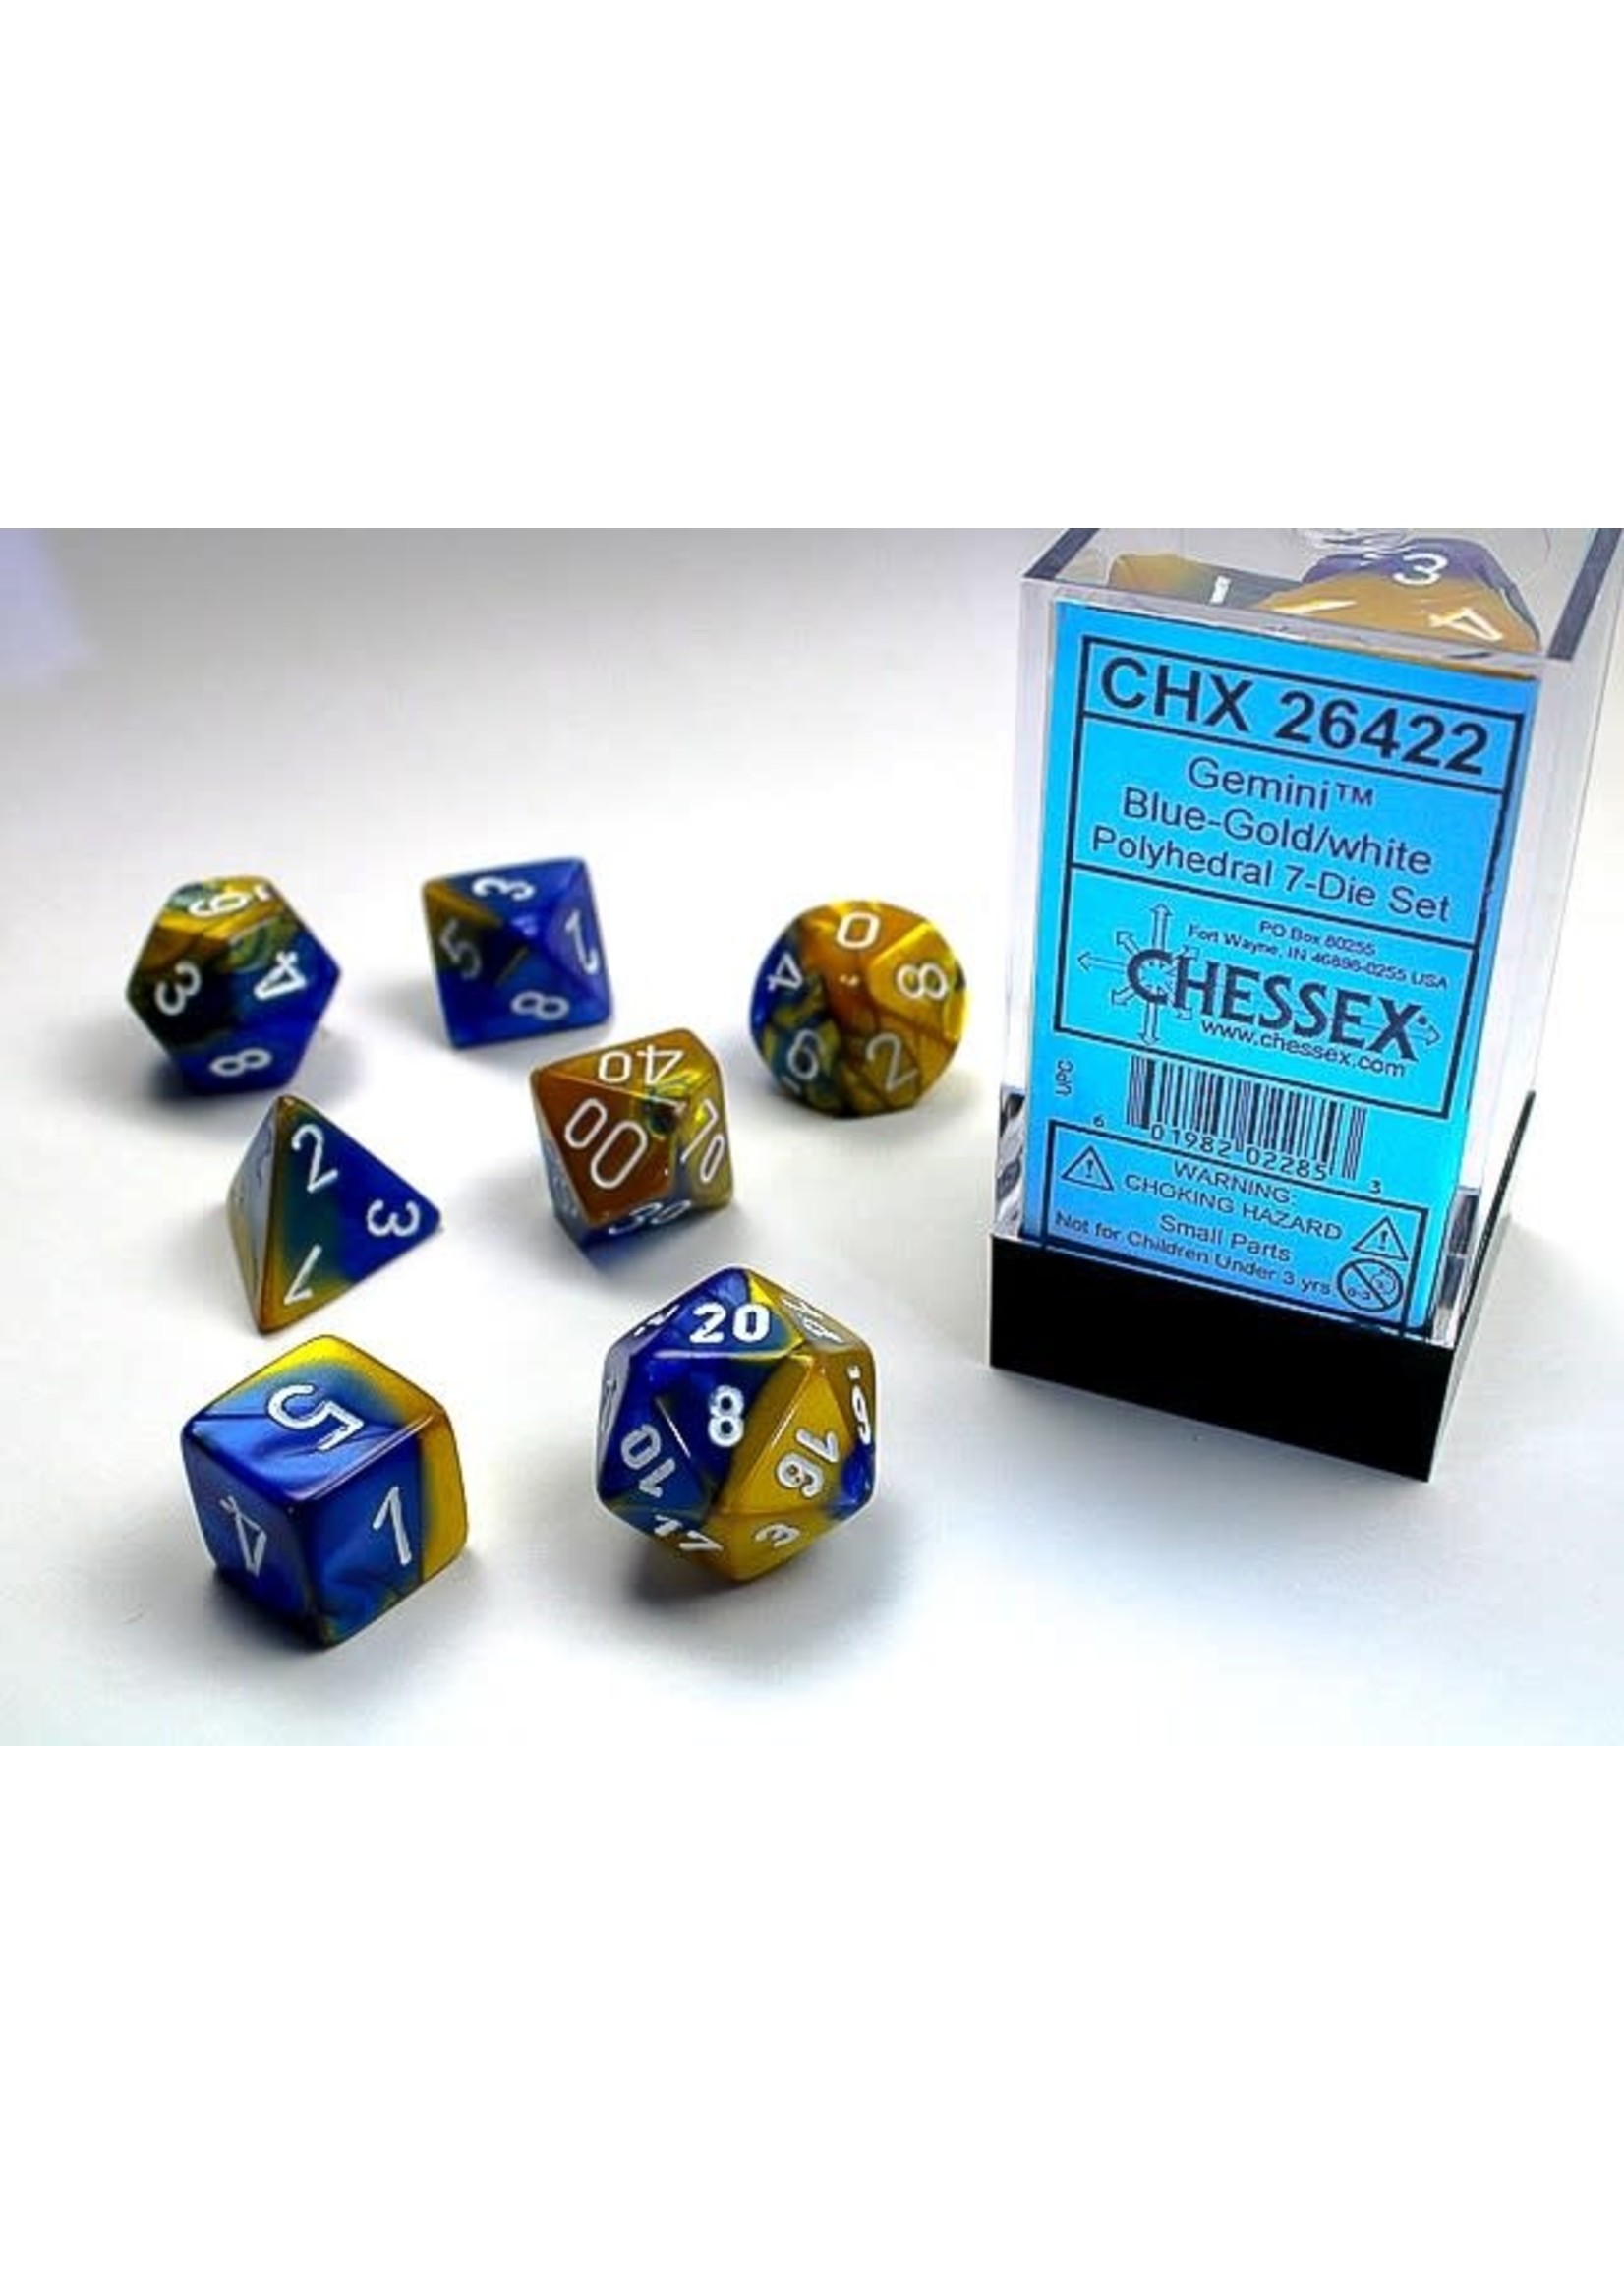 Chessex Gemini Blue-Gold/white - Set of 7 Polyhedral Dice by Chessex